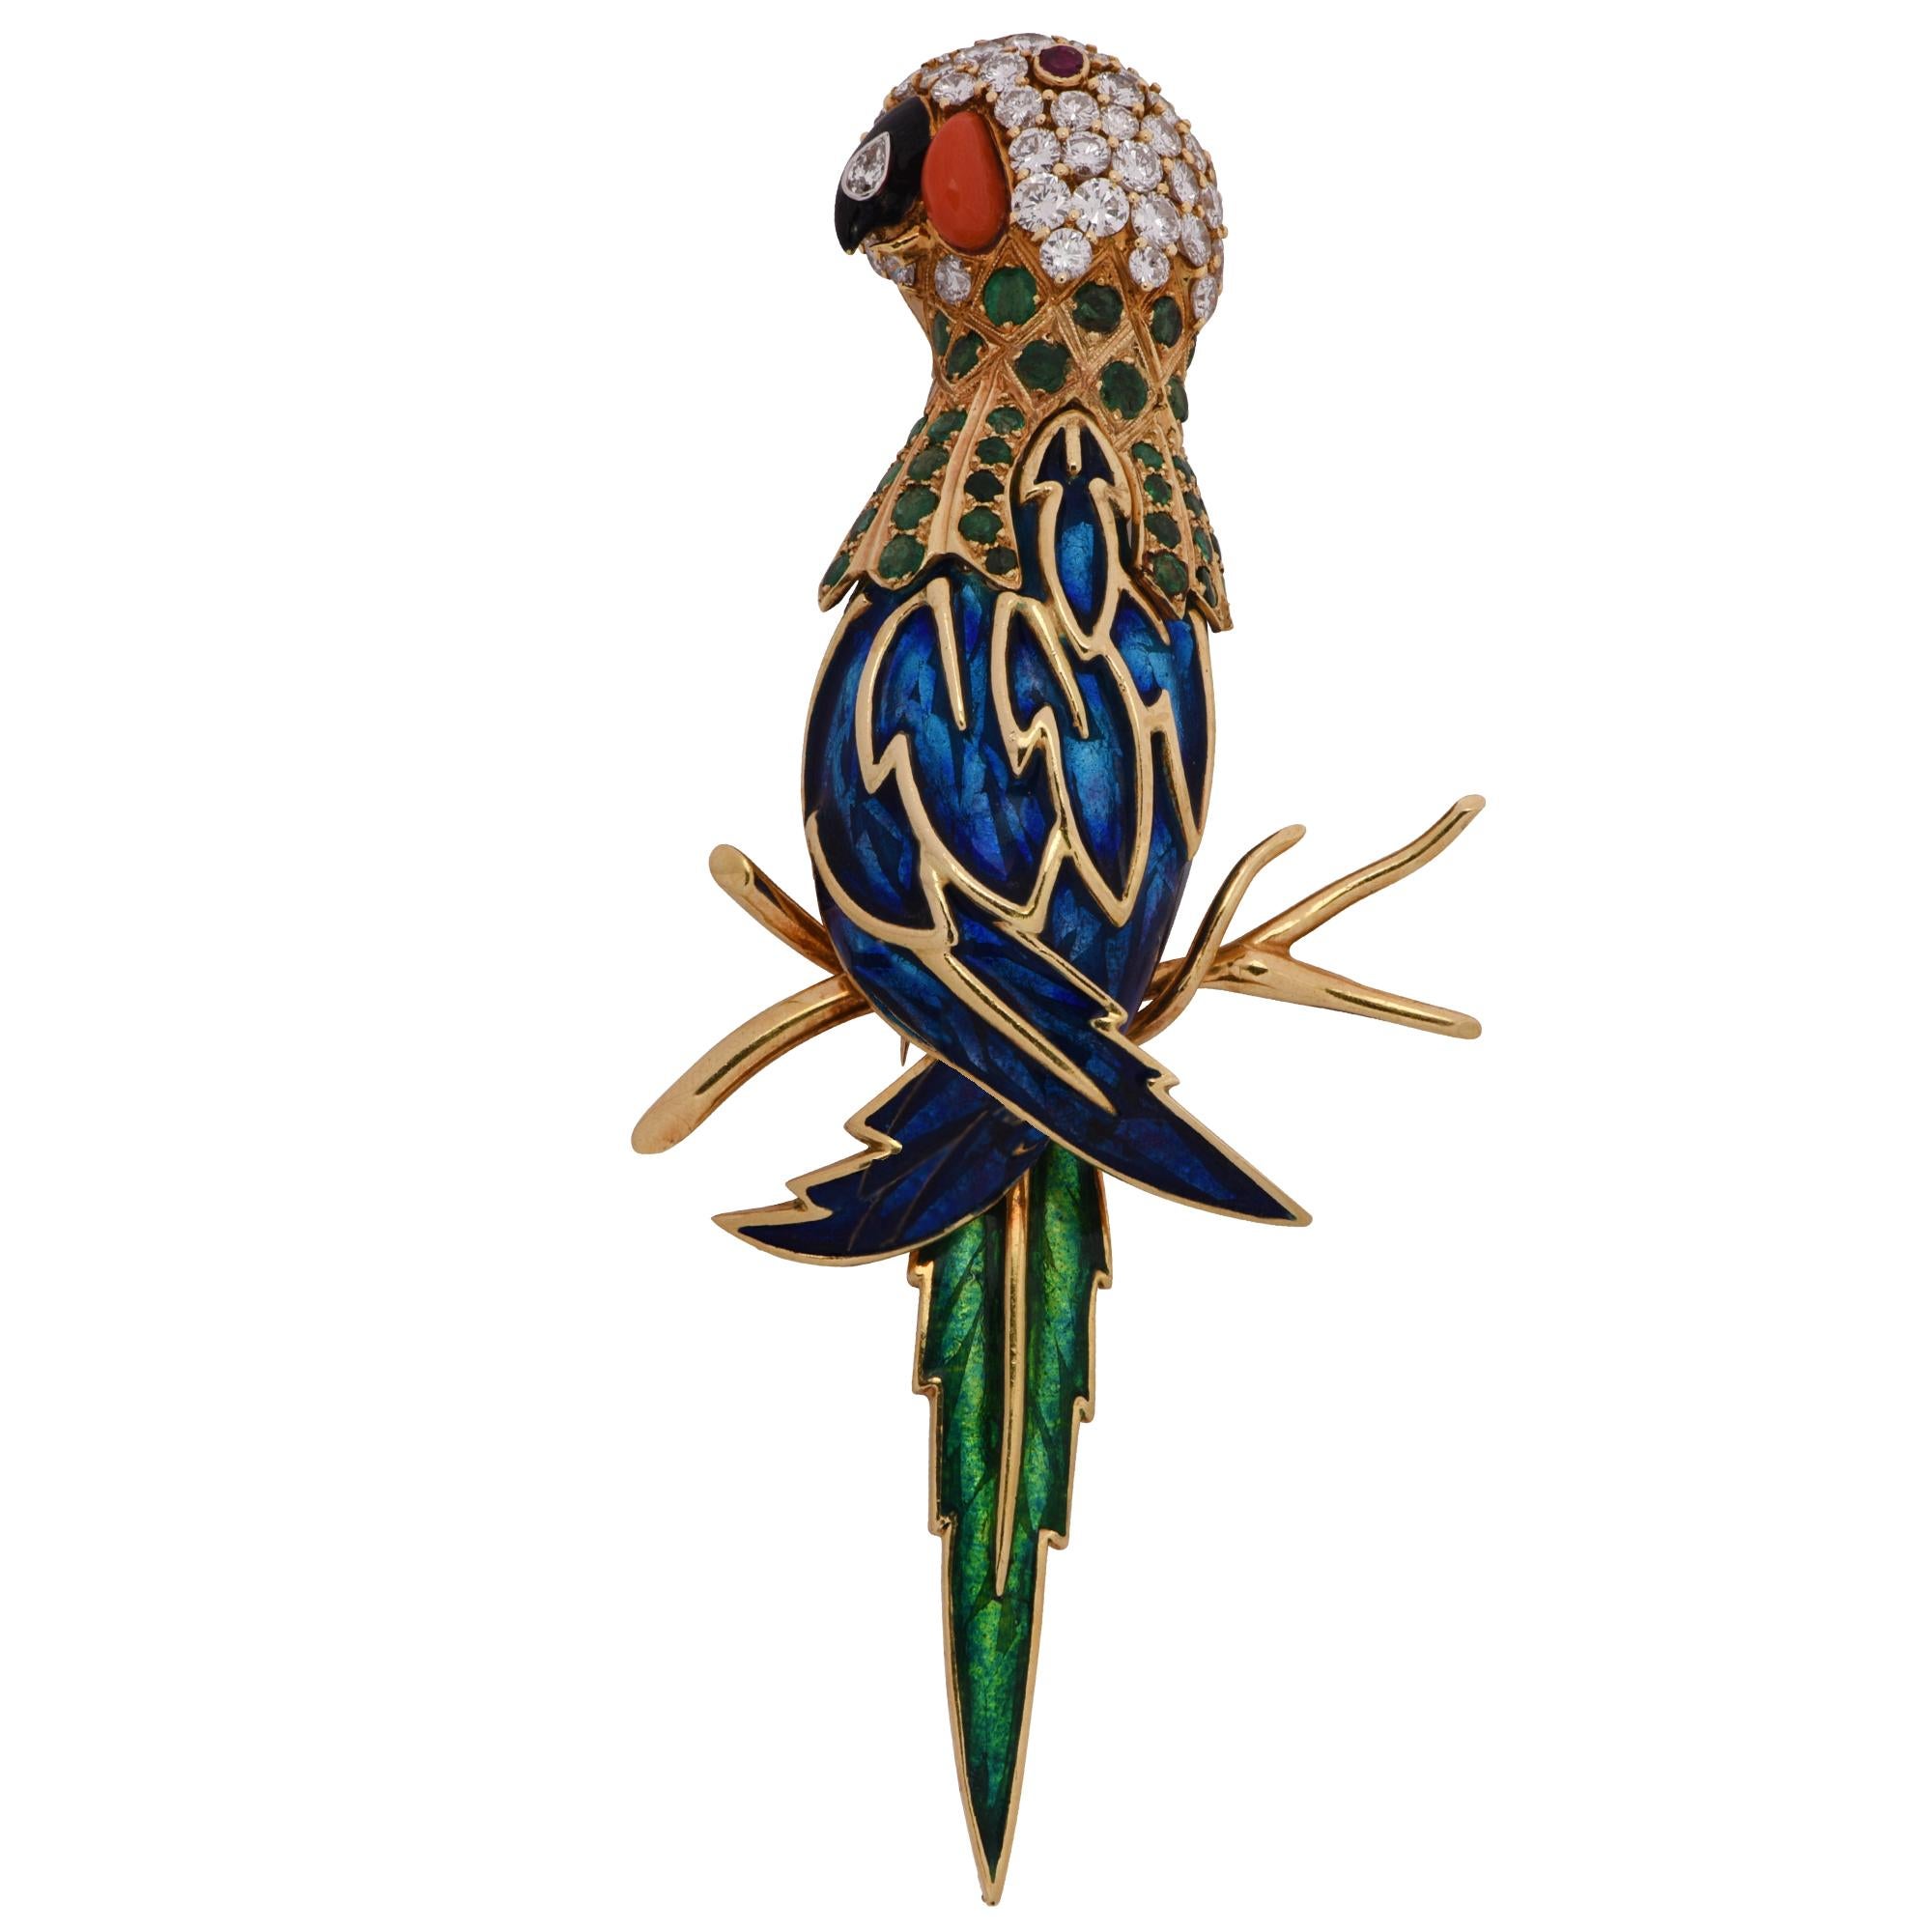 Diamond, Emerald, Coral and Enamel Parrot Brooch Pin